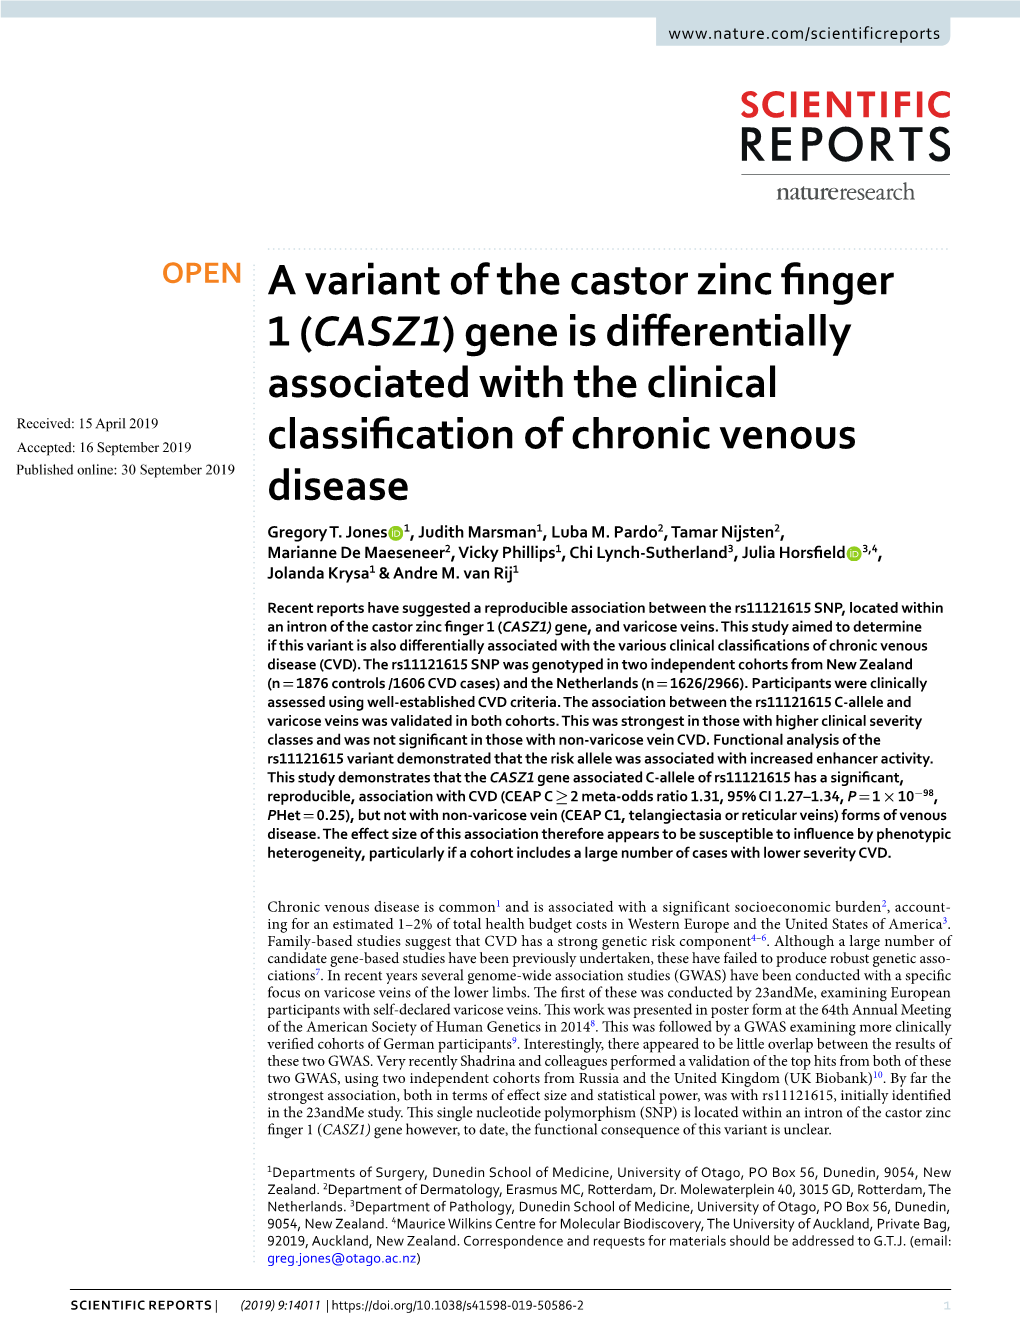 (CASZ1) Gene Is Differentially Associated with the Clinical Classification of Chronic Veno